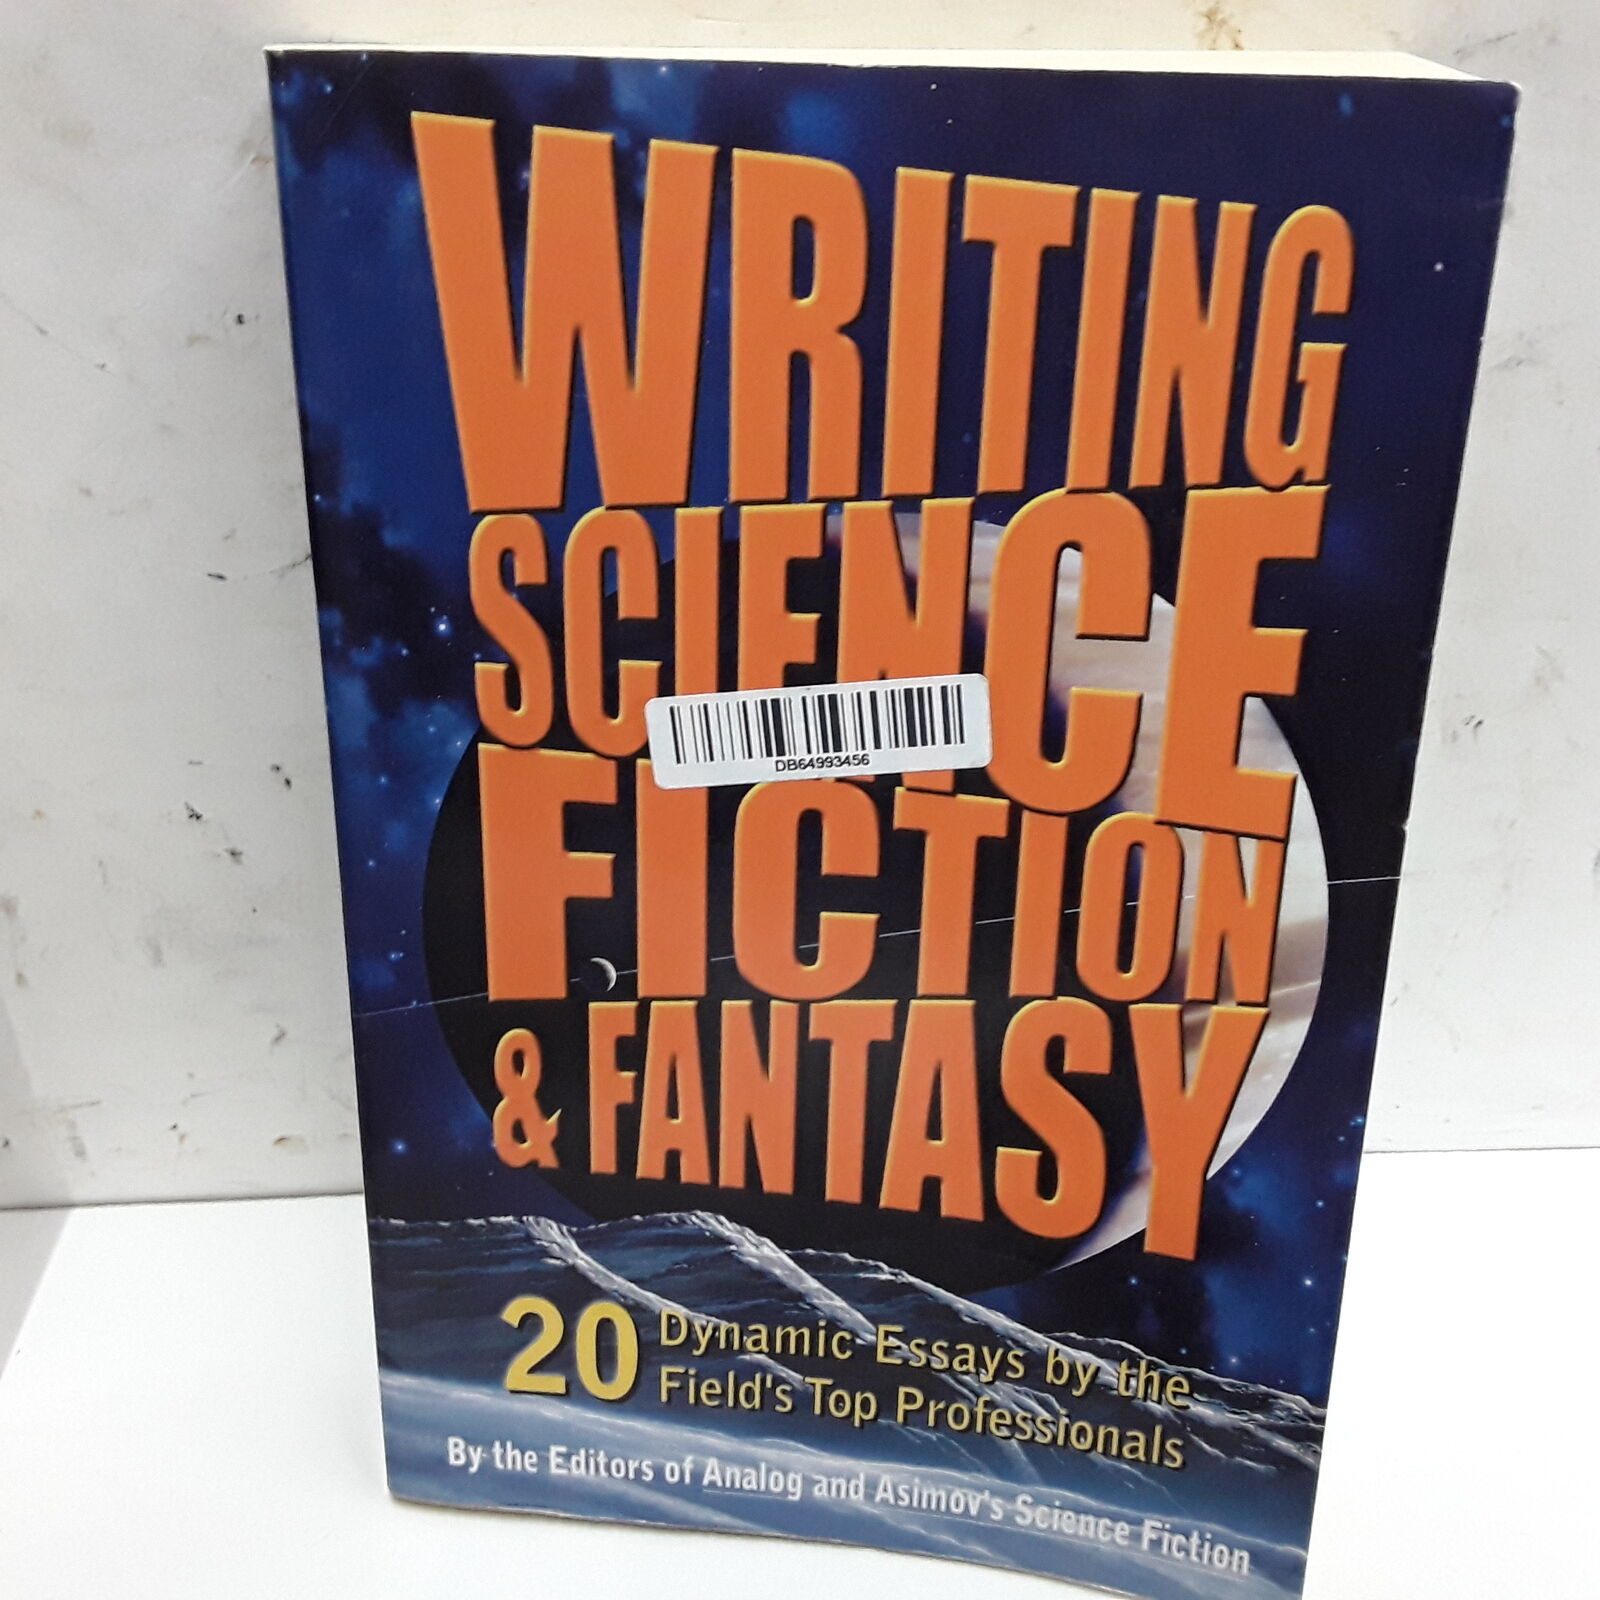 Primary image for Writing Science Fiction & Fantasy: 20 Dynamic Essays by the Field's Top Professi